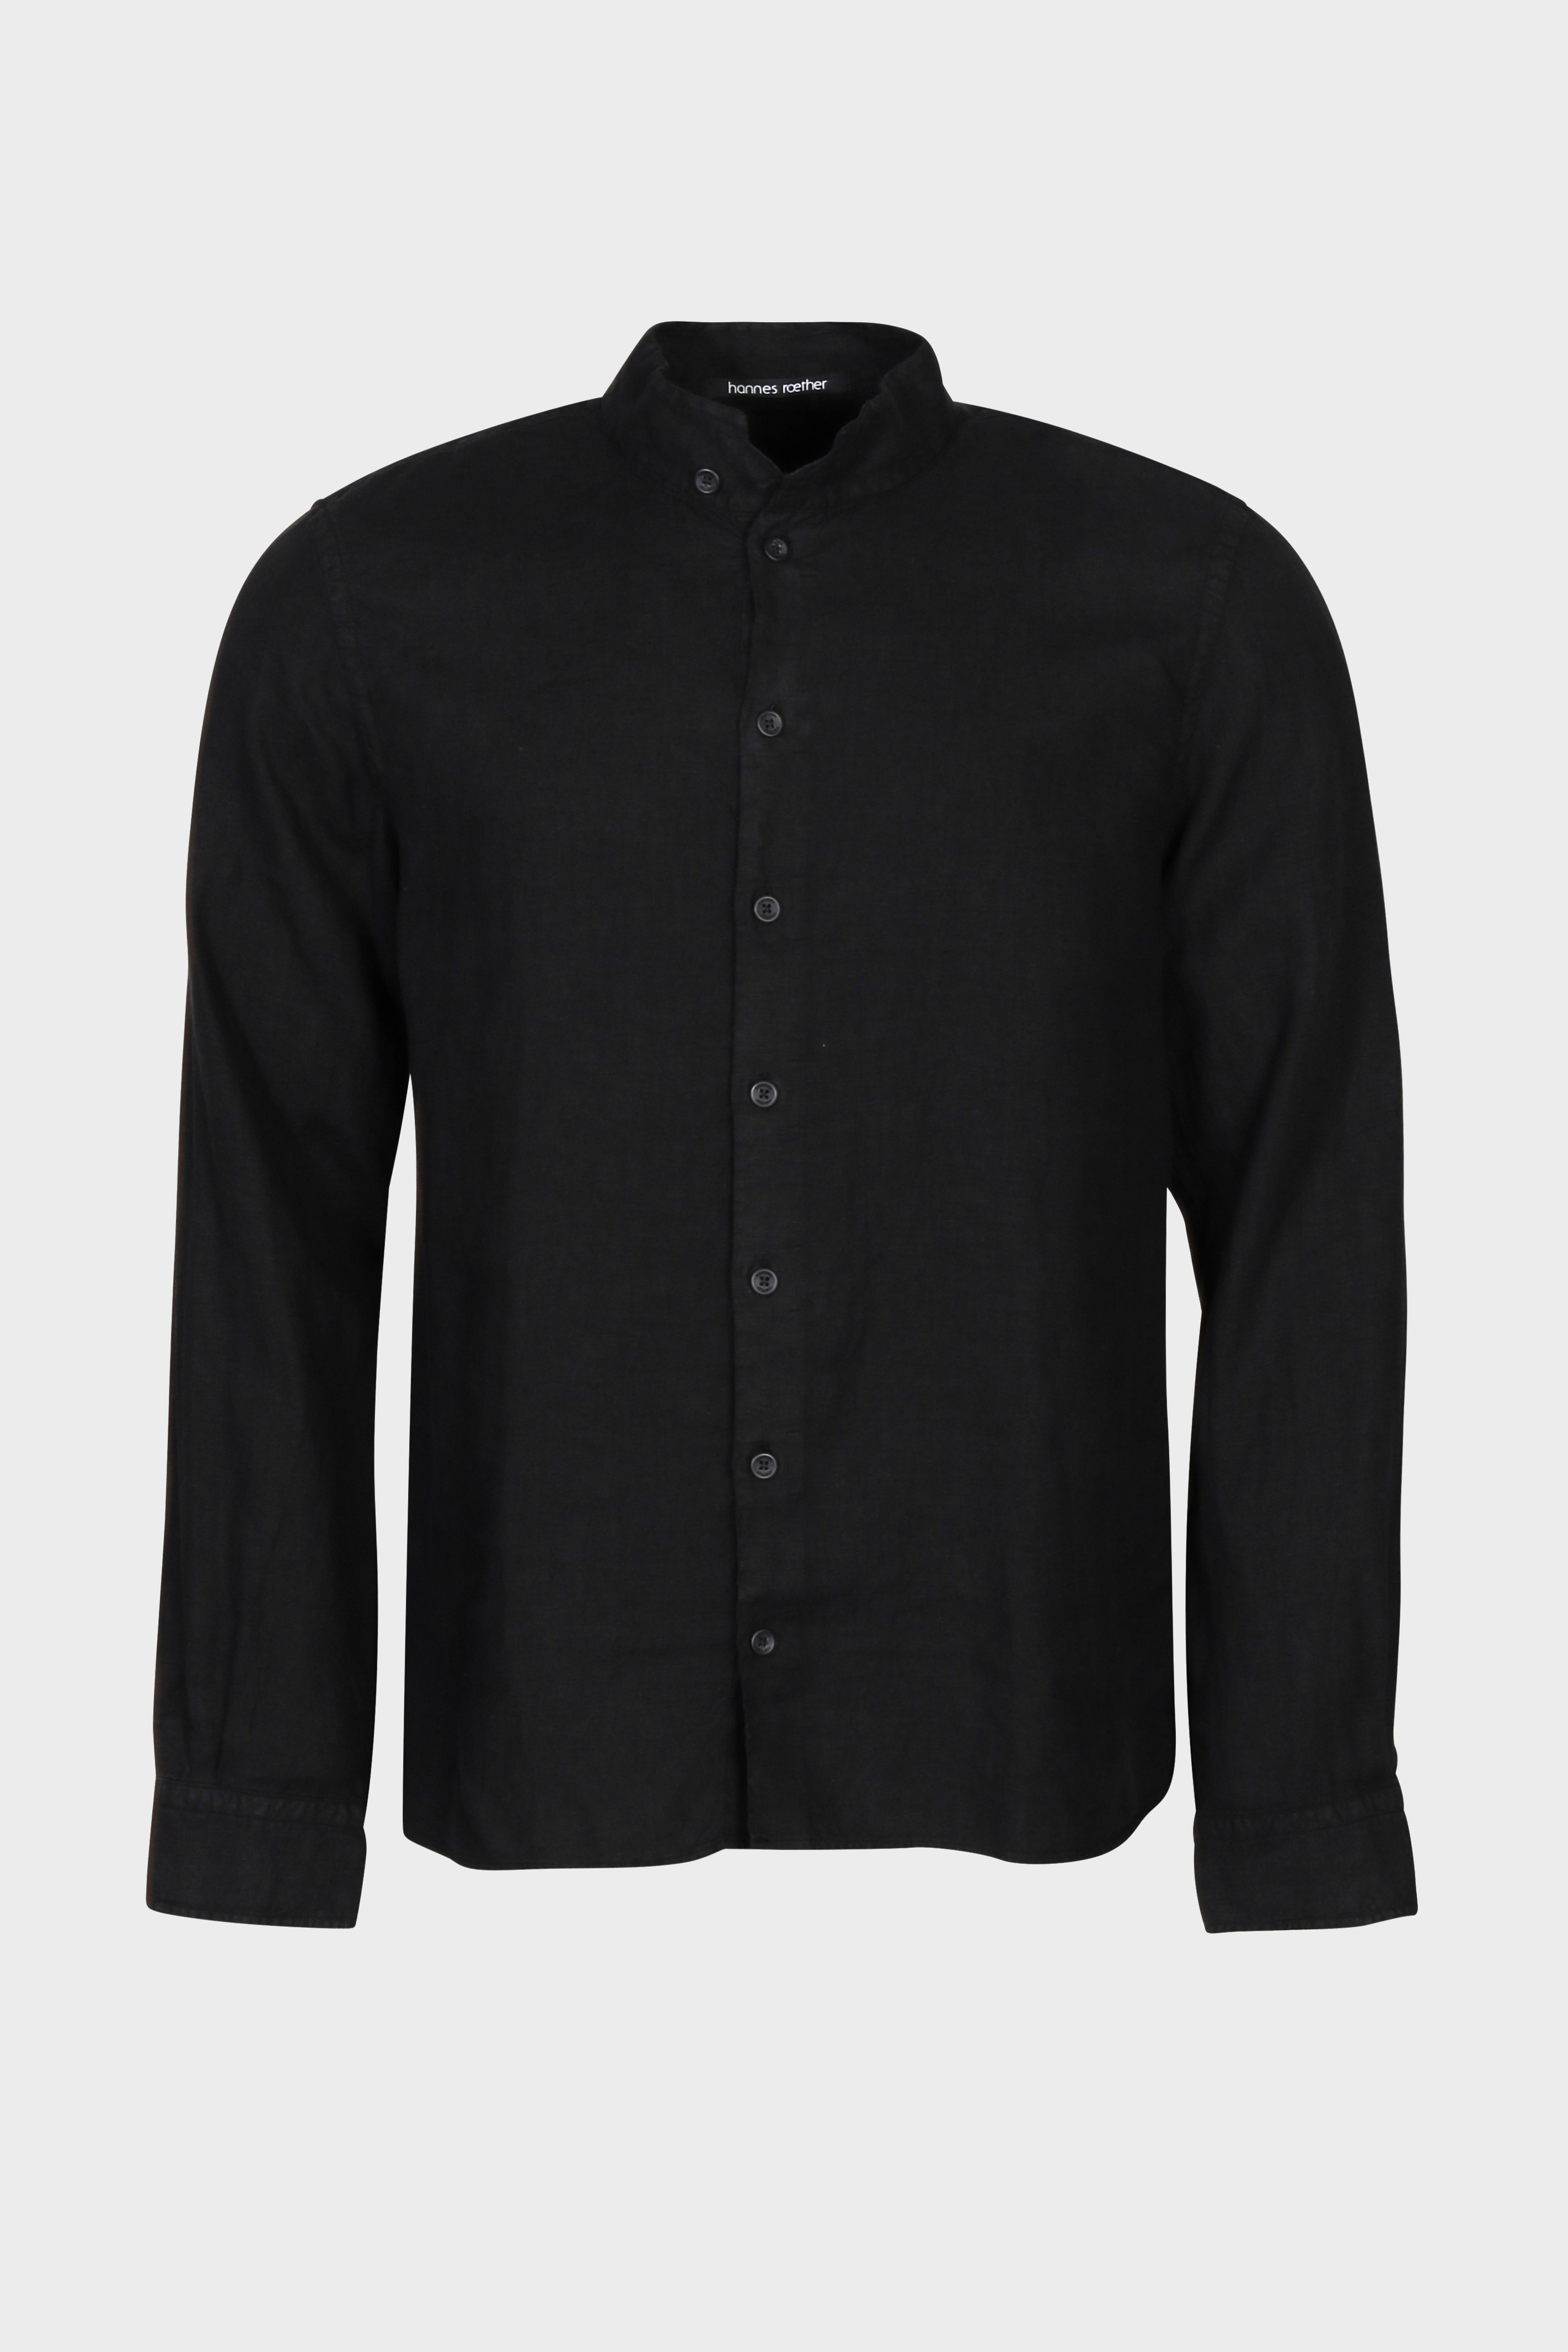 HANNES ROETHER Linen Shirt in Black